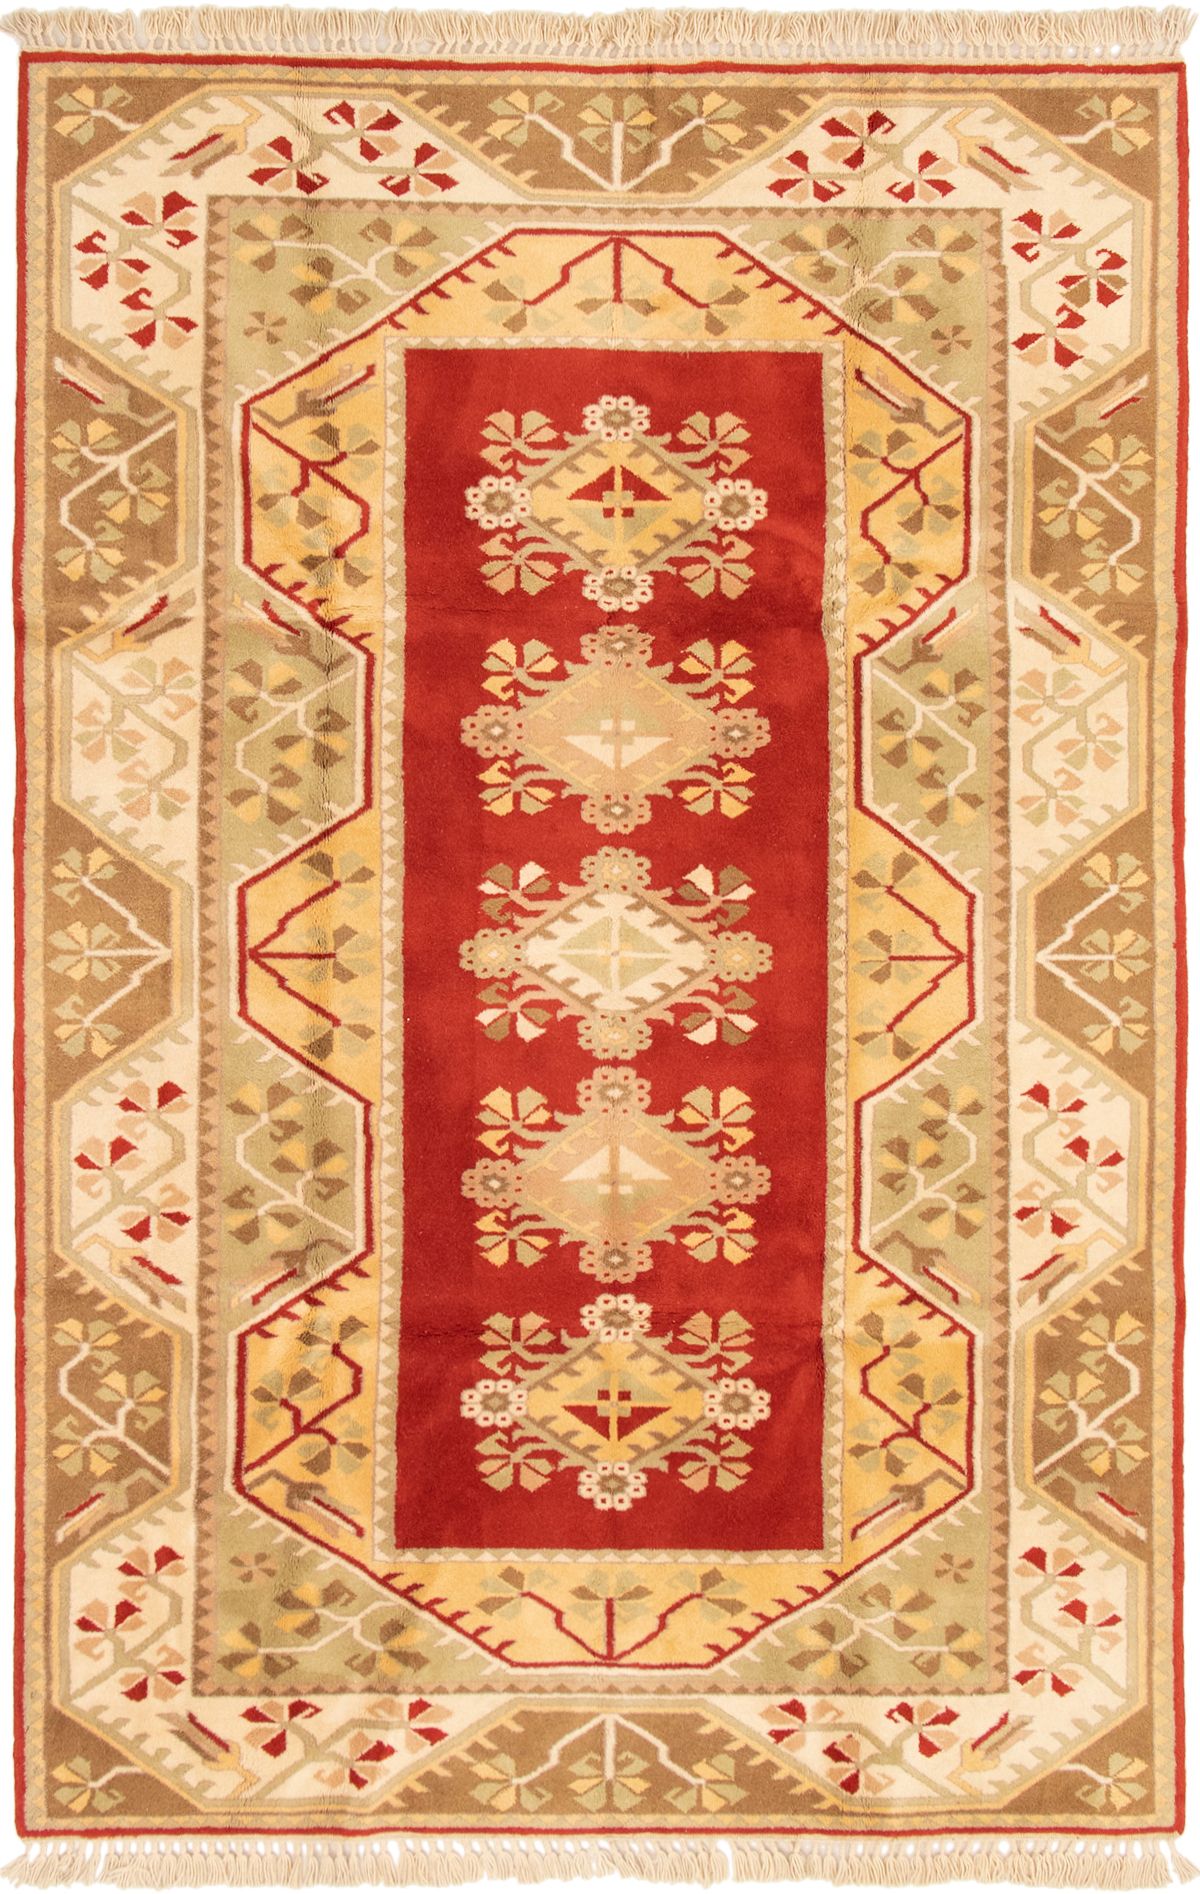 Hand-knotted Ushak Dark Red, Tan Wool Rug 6'6" x 9'10" Size: 6'6" x 9'10"  